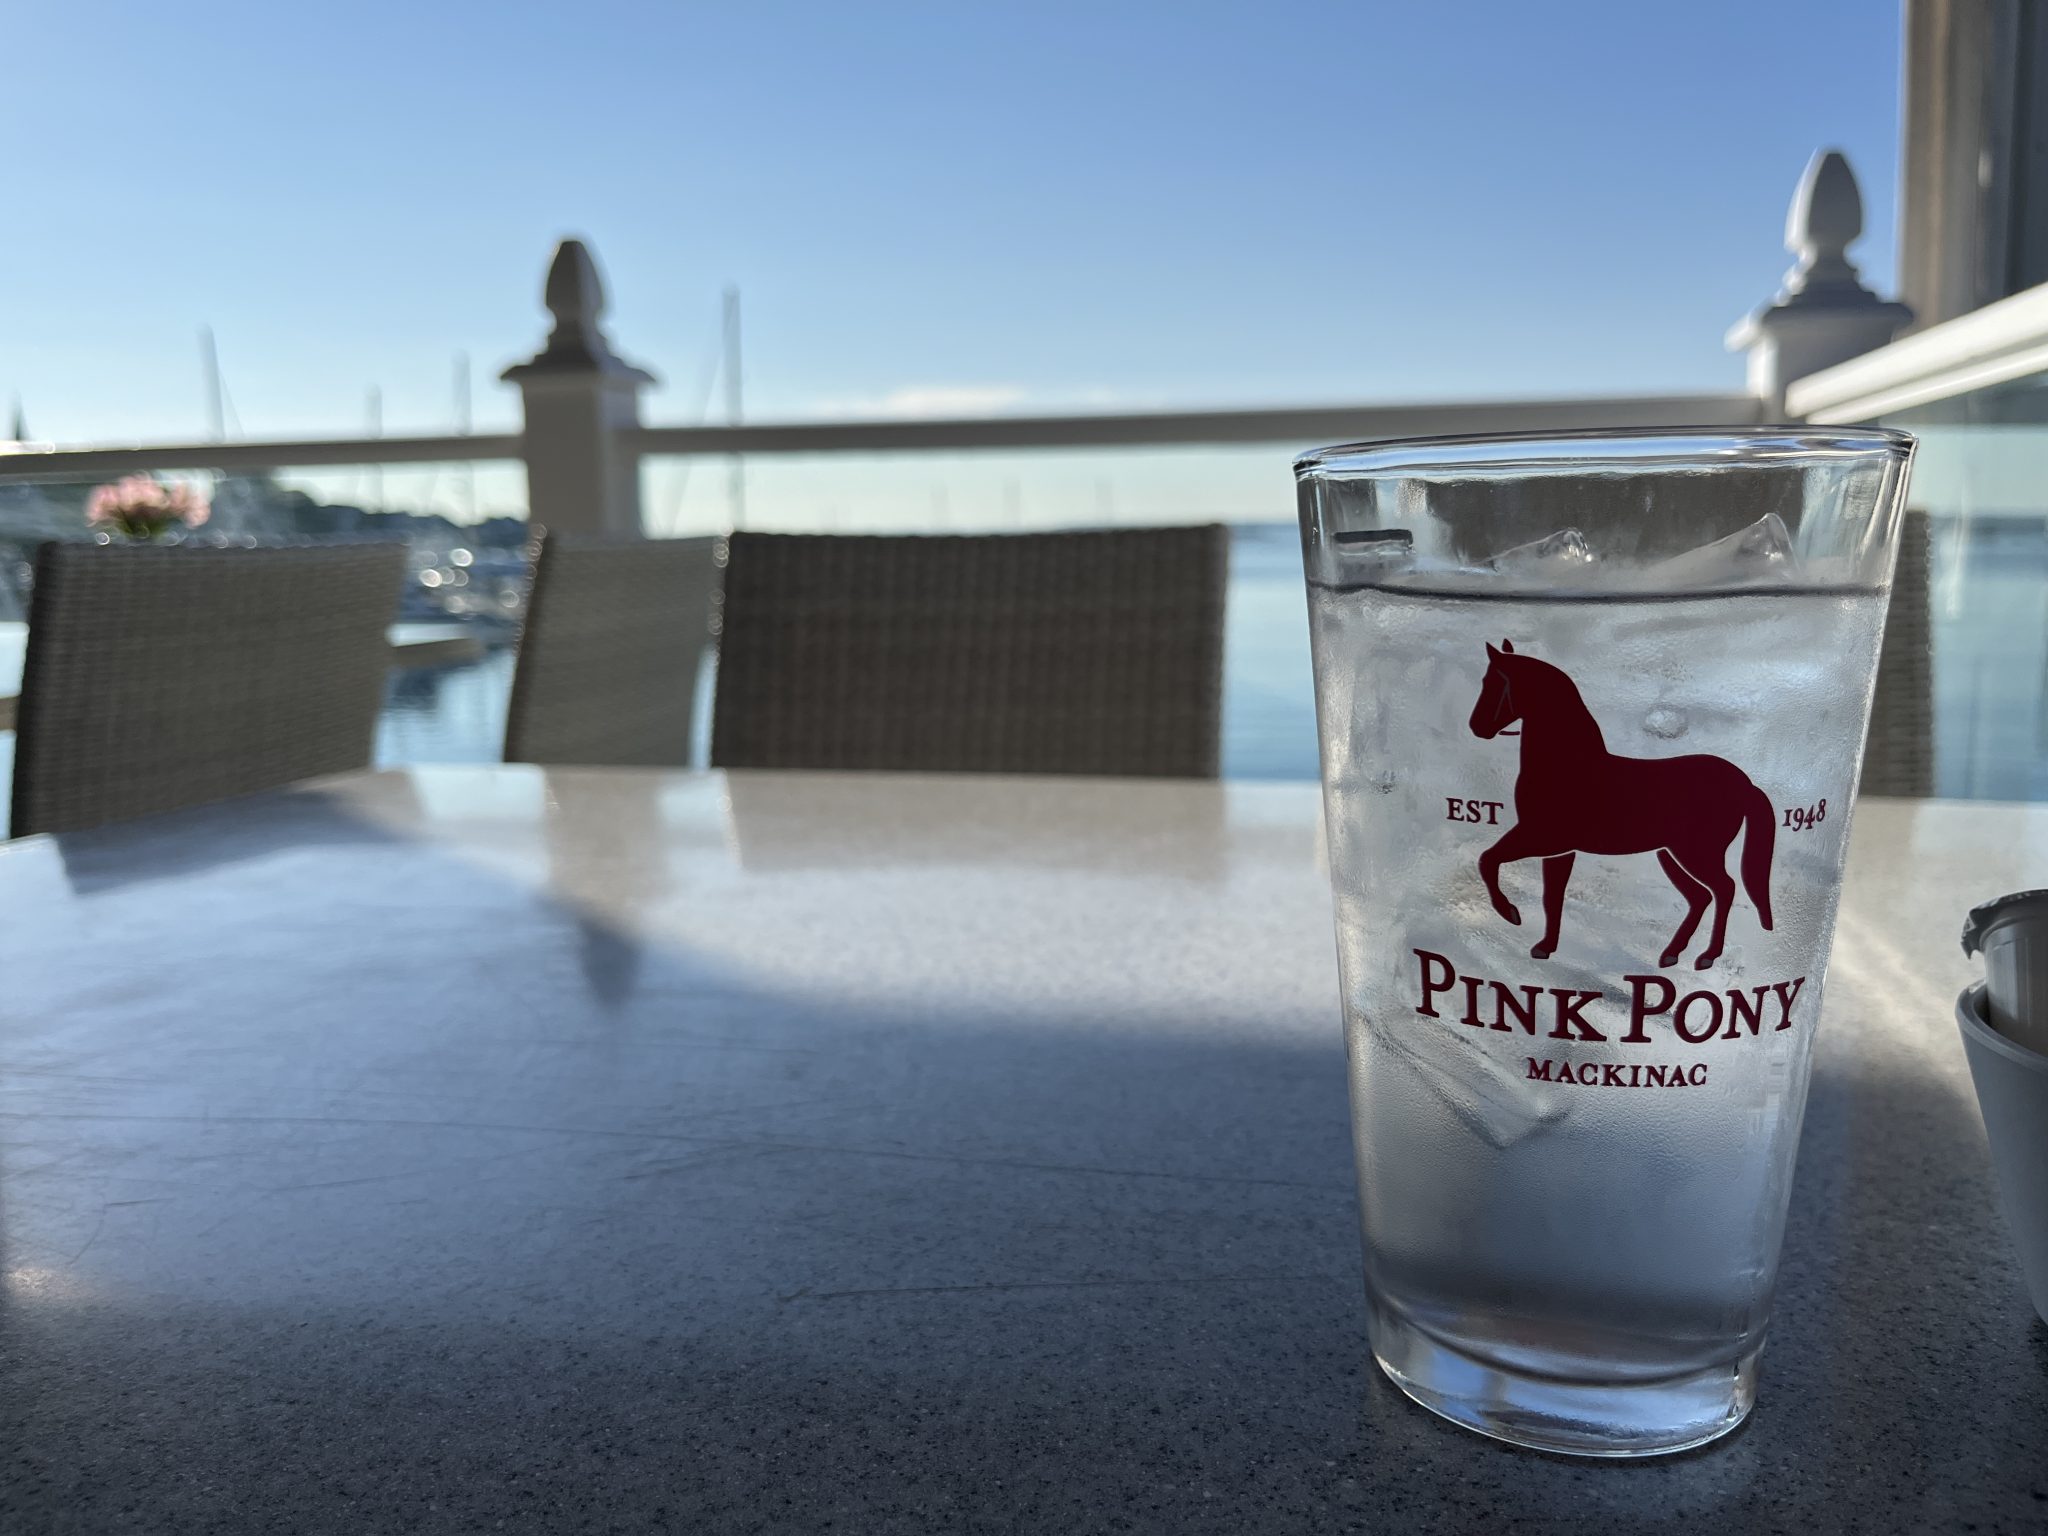 Breakfast by the lake at the Pink Pony on Mackinac Island